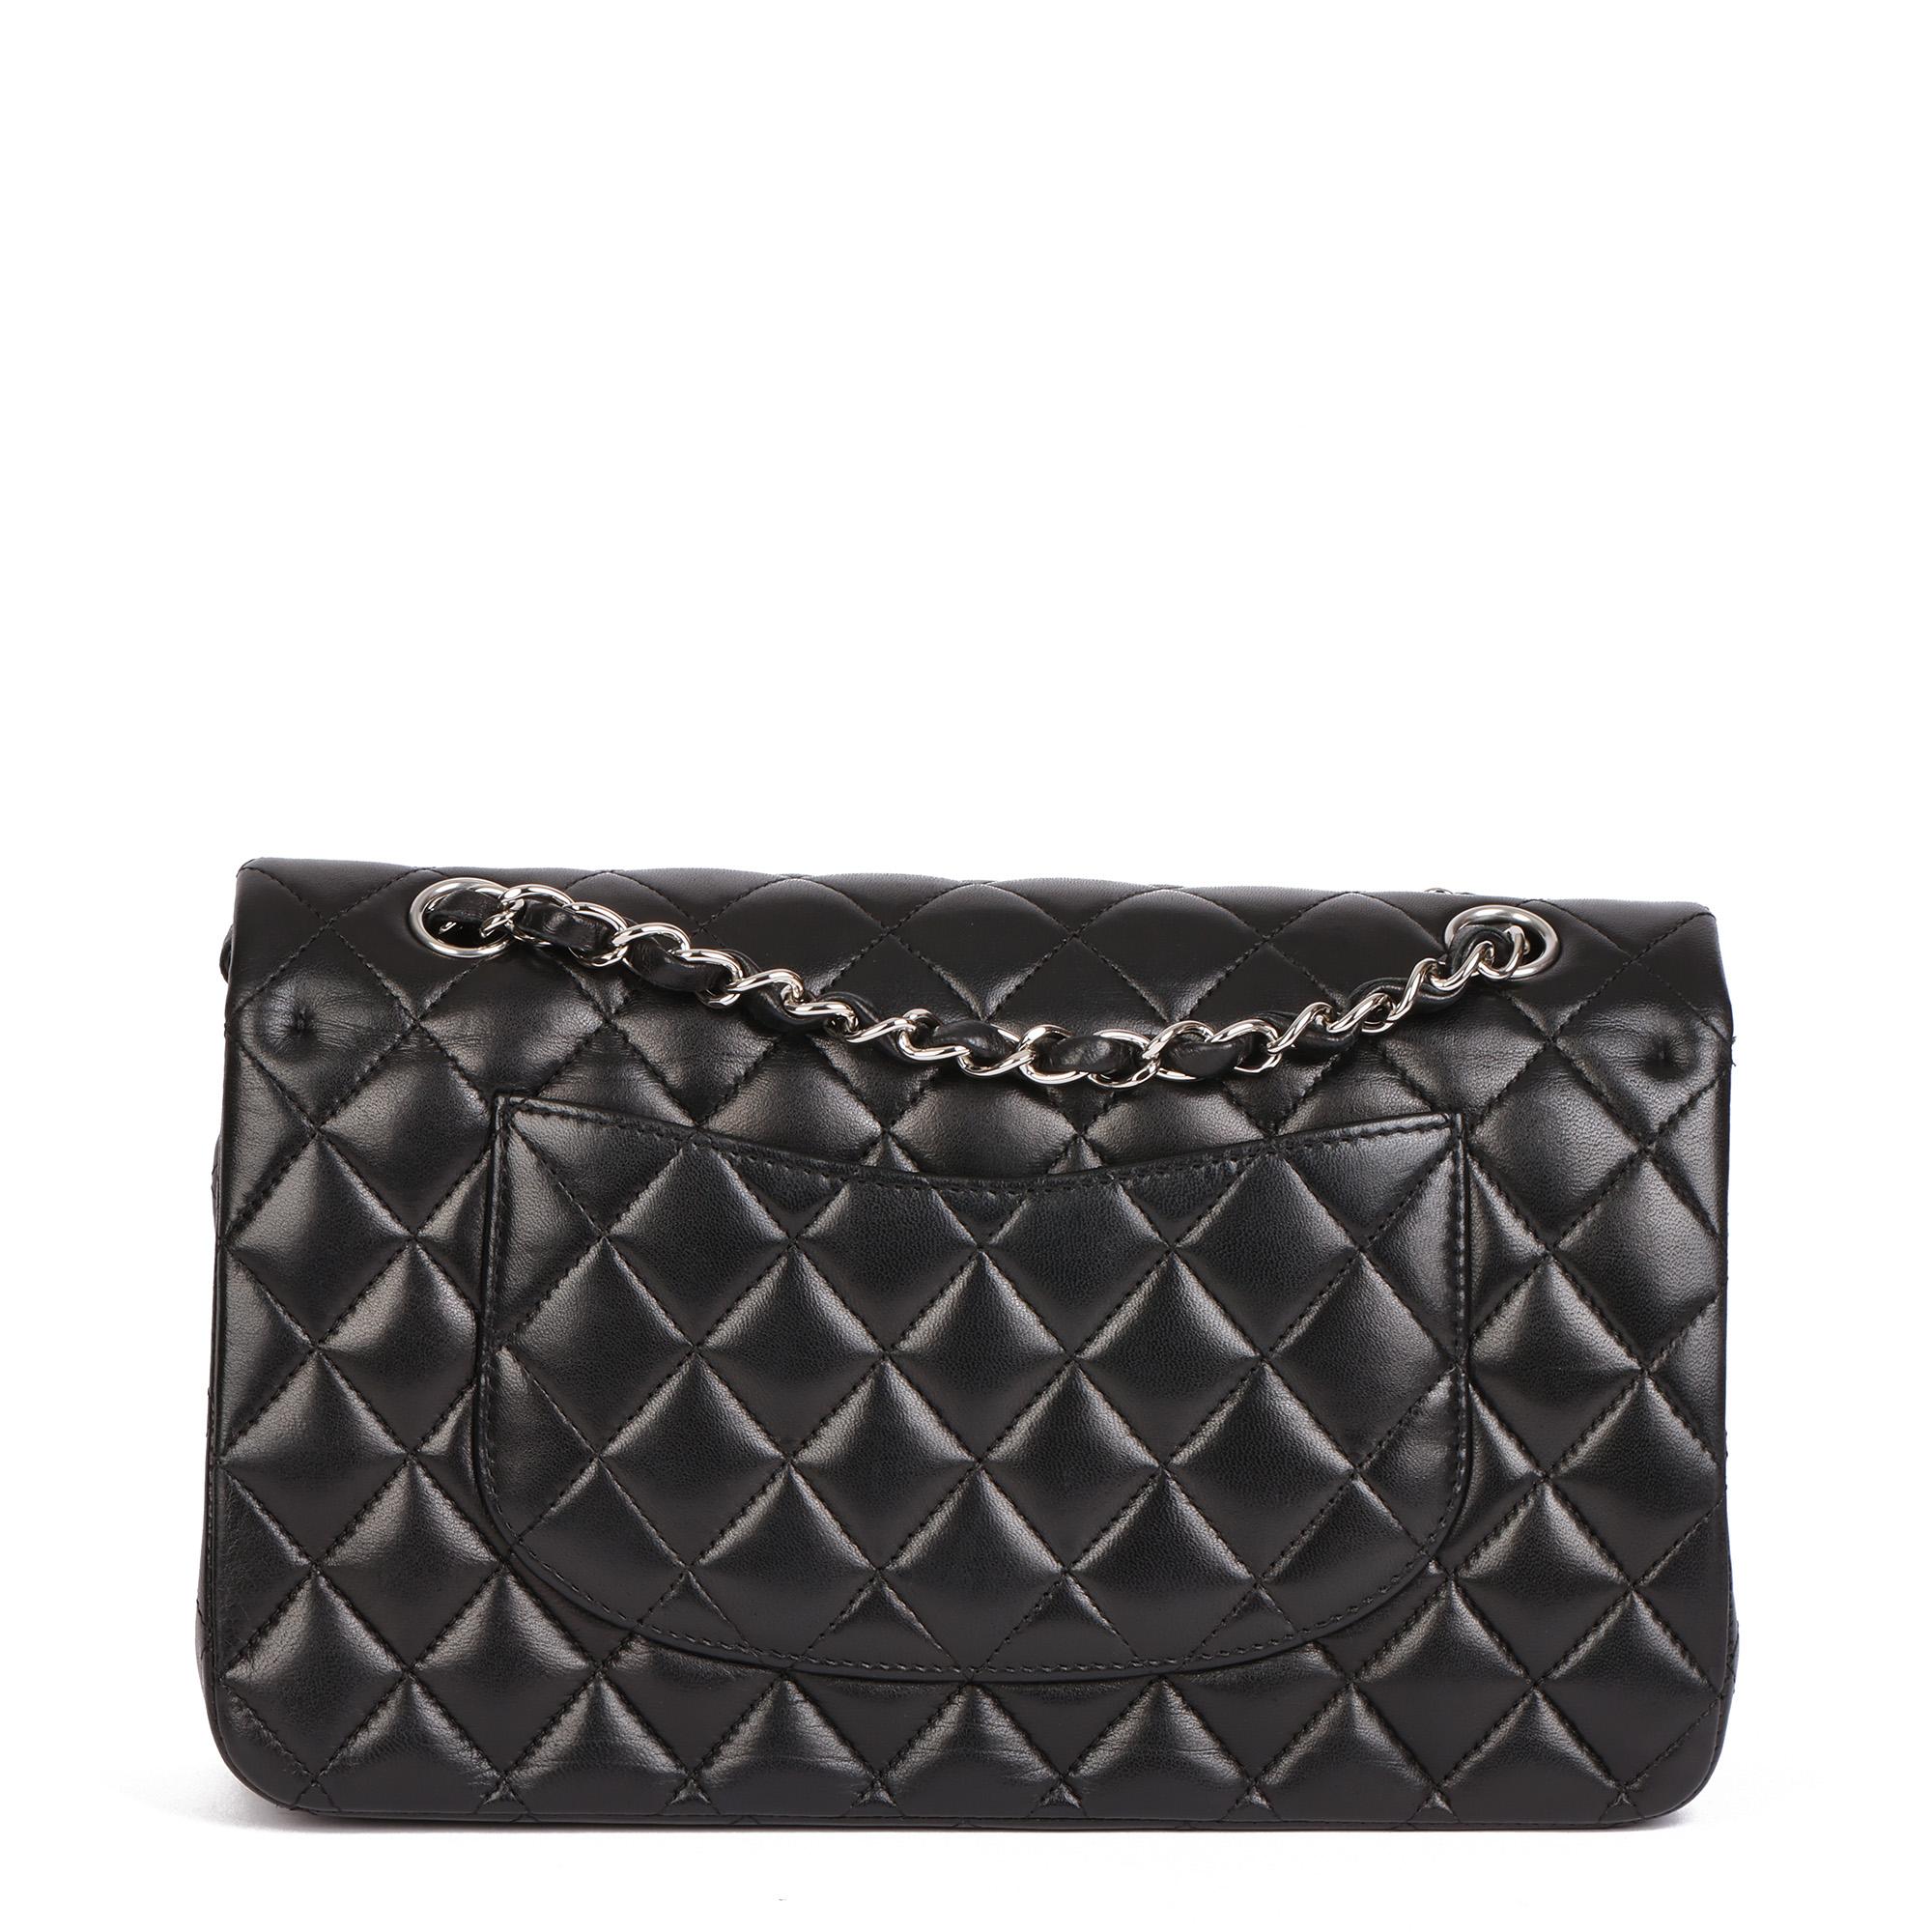 CHANEL Black Quilted Lambskin Medium Classic Double Flap Bag 1